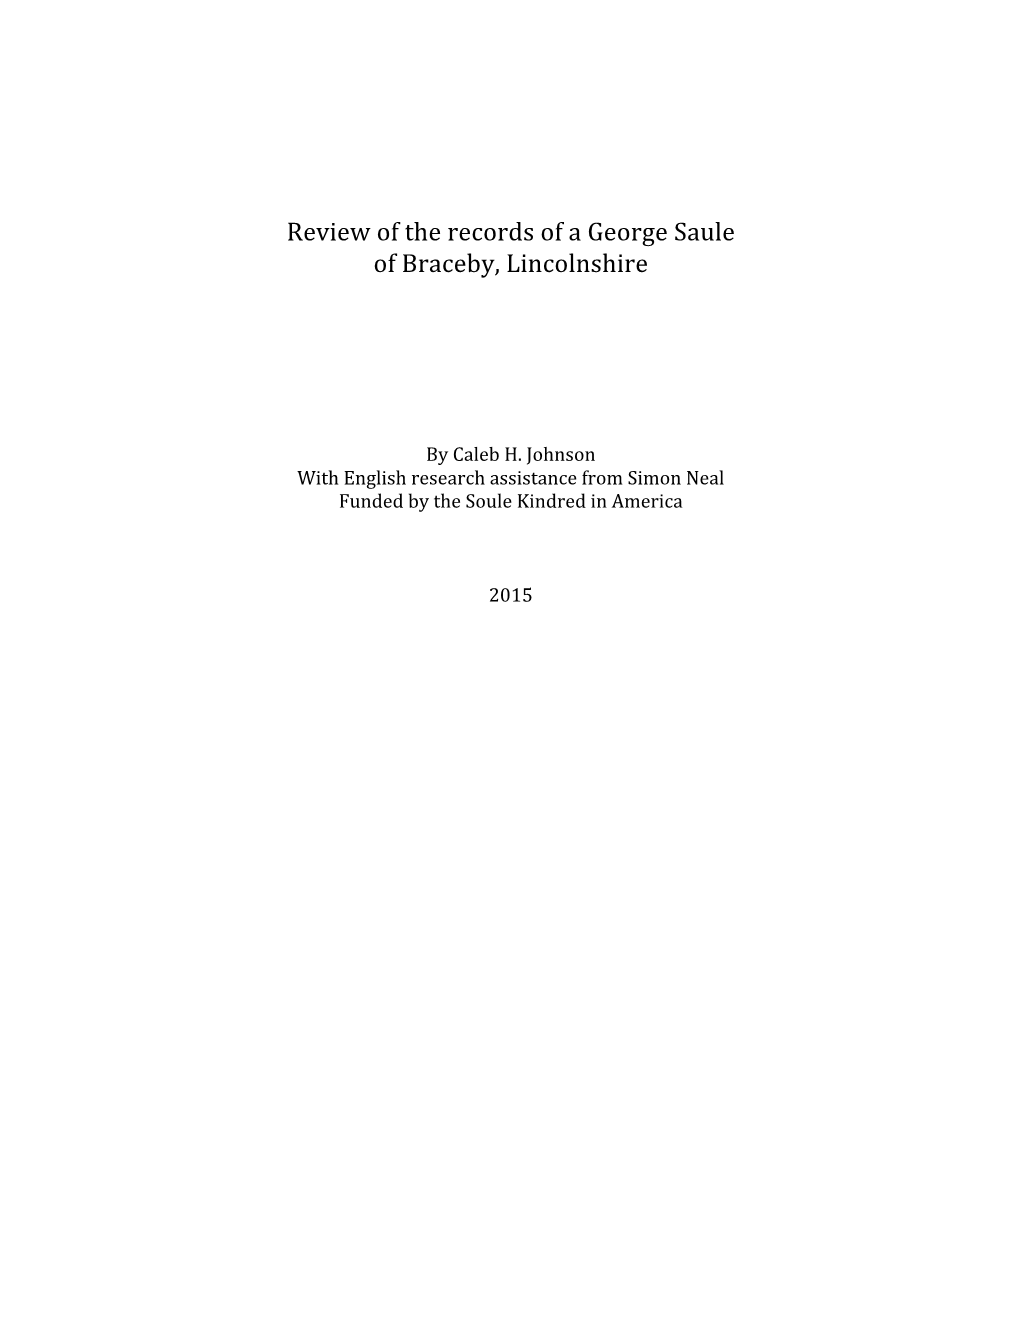 Review of the Records of a George Saule of Braceby, Lincolnshire